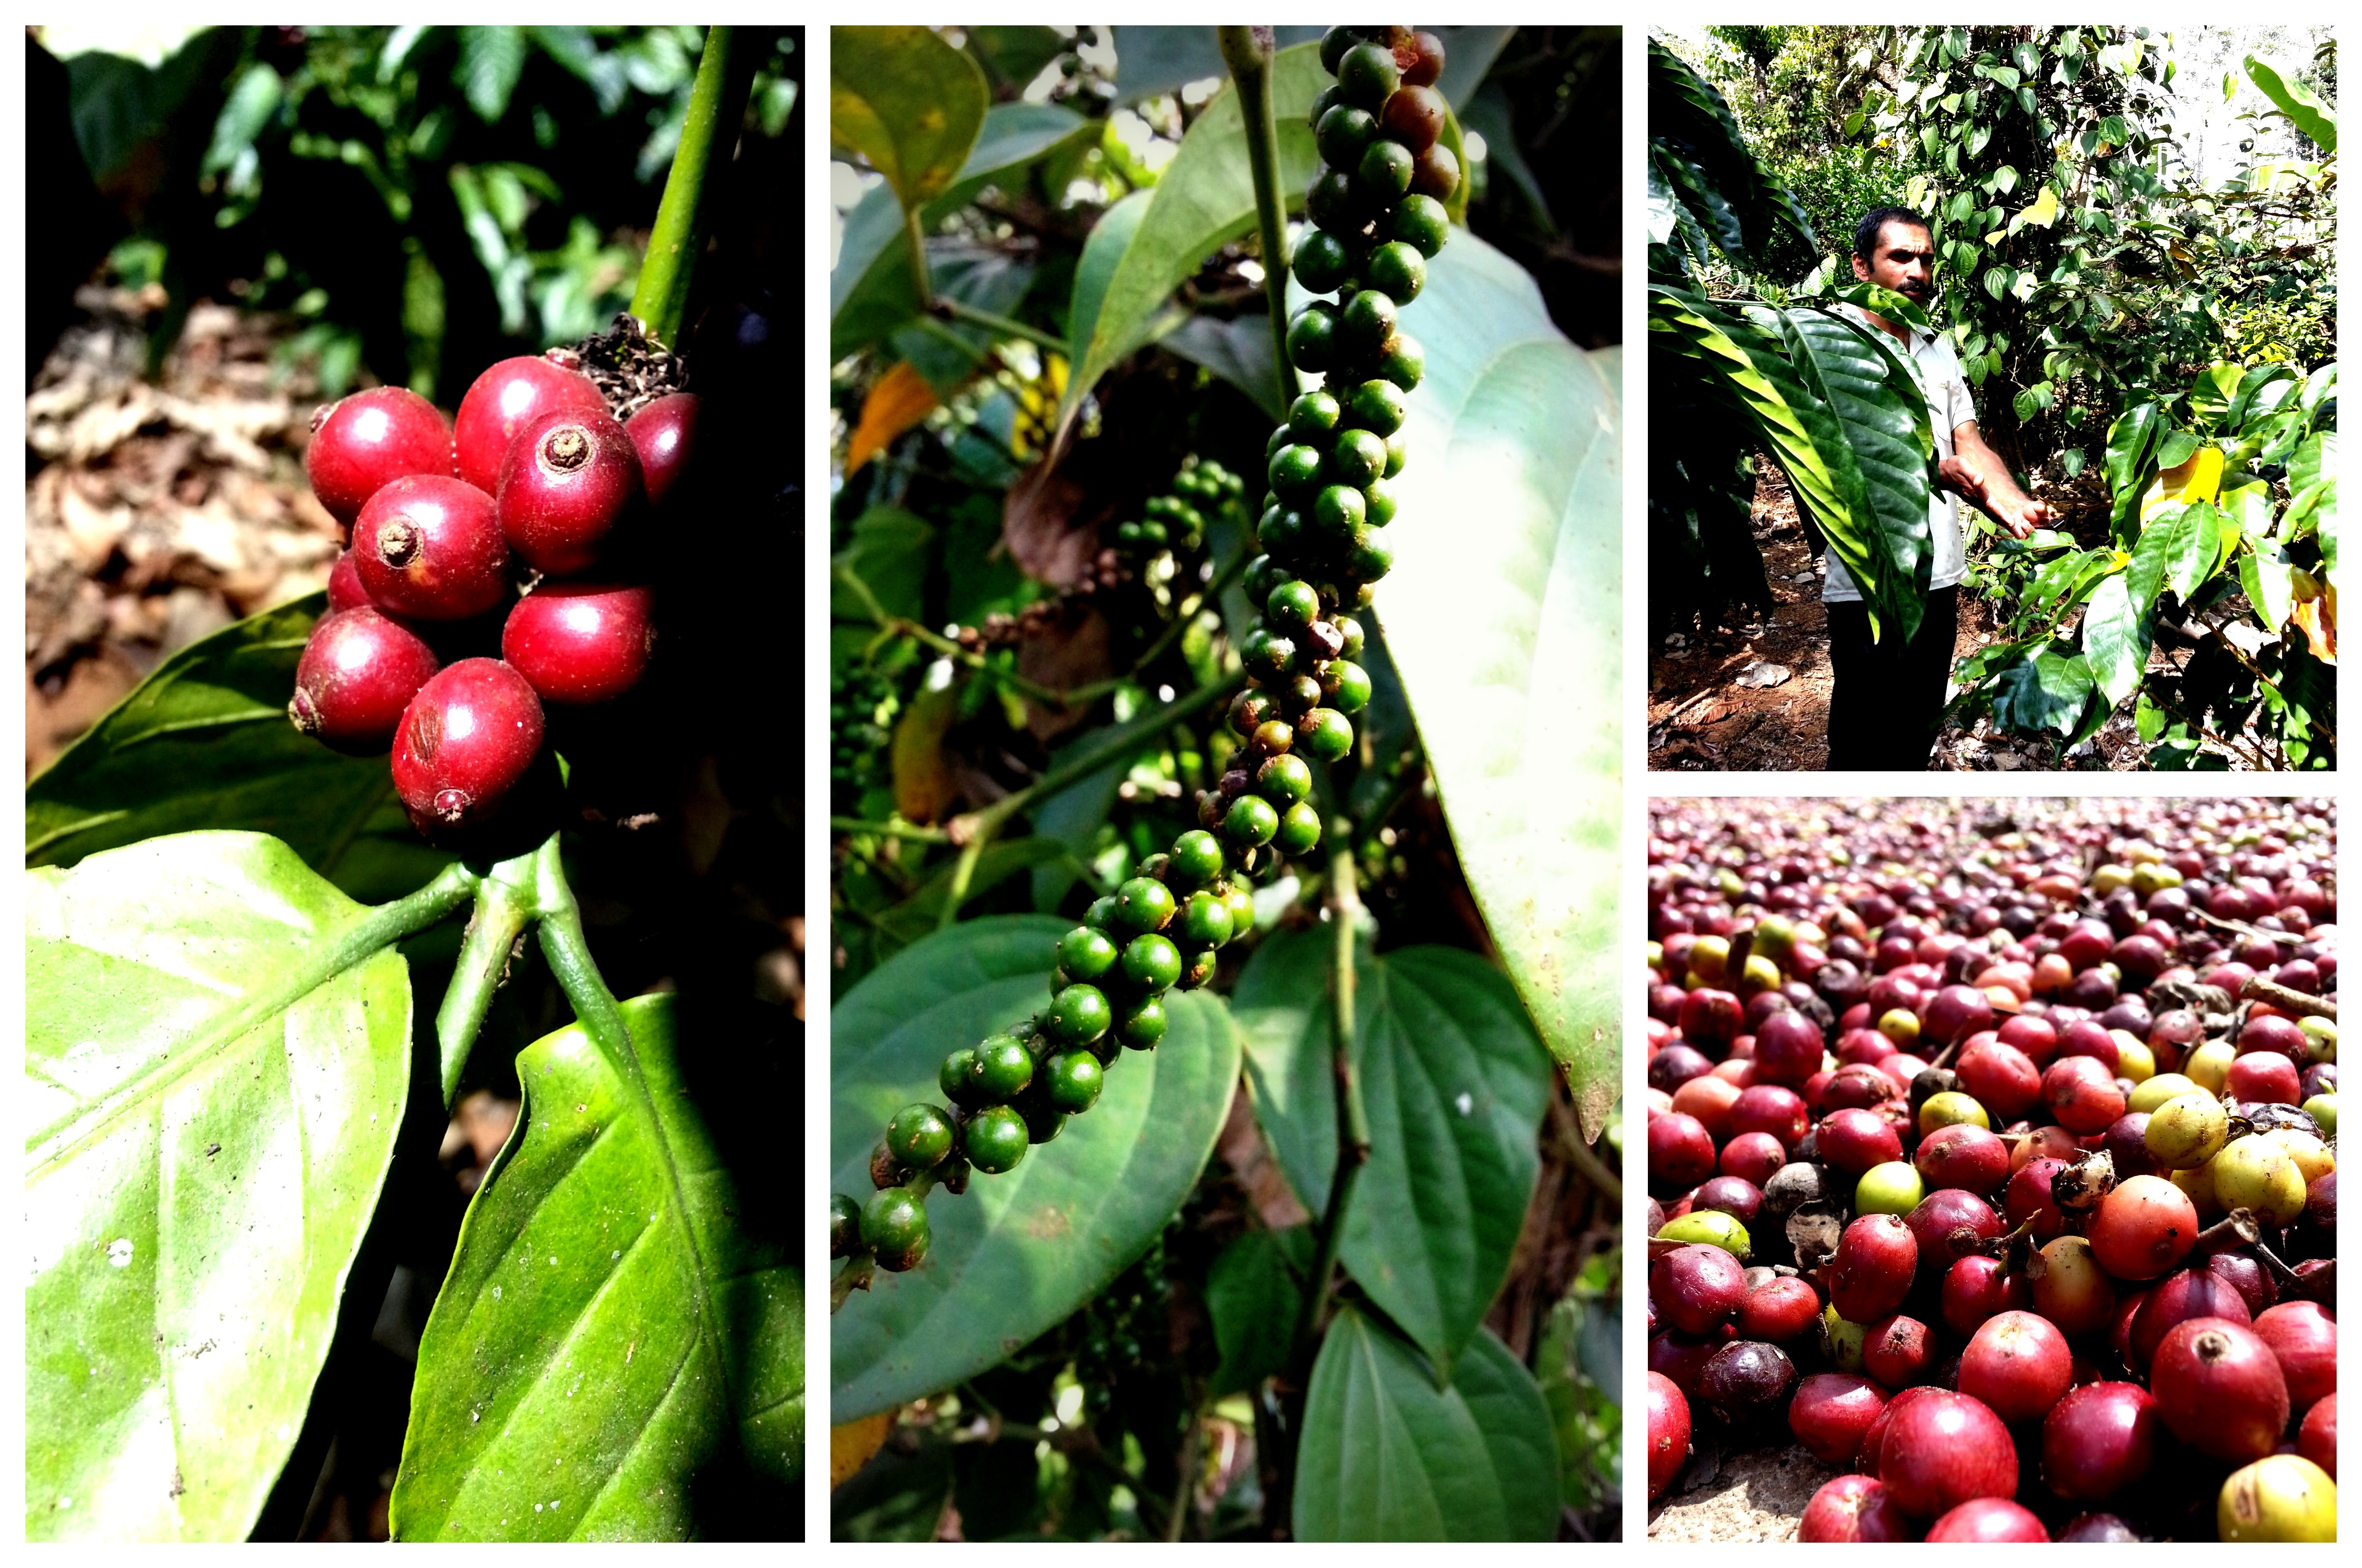 Clockwise from left: Coffee berries, pepper corns, the owner of the estate, coffee berries put out to dry. Image source: Dipankar Paul/Folomojo